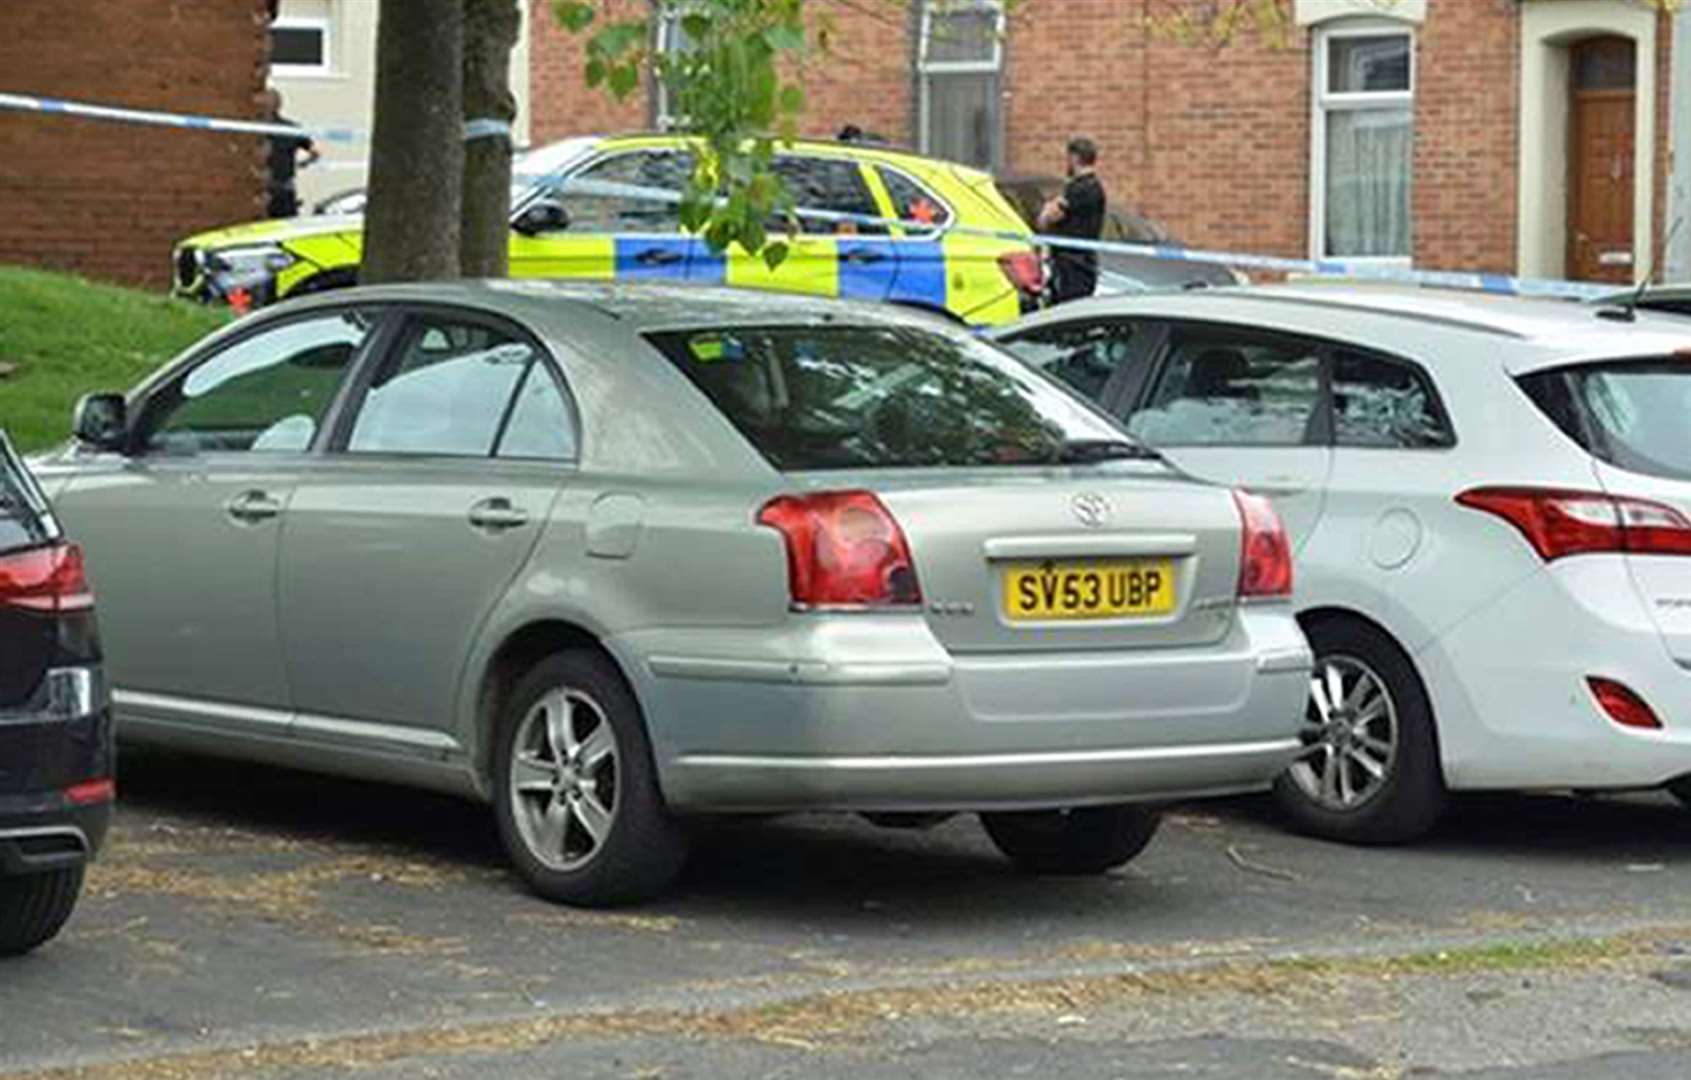 The Toyota Avensis that police believe was used in the shooting was later found abandoned (Lancashire Police/PA)